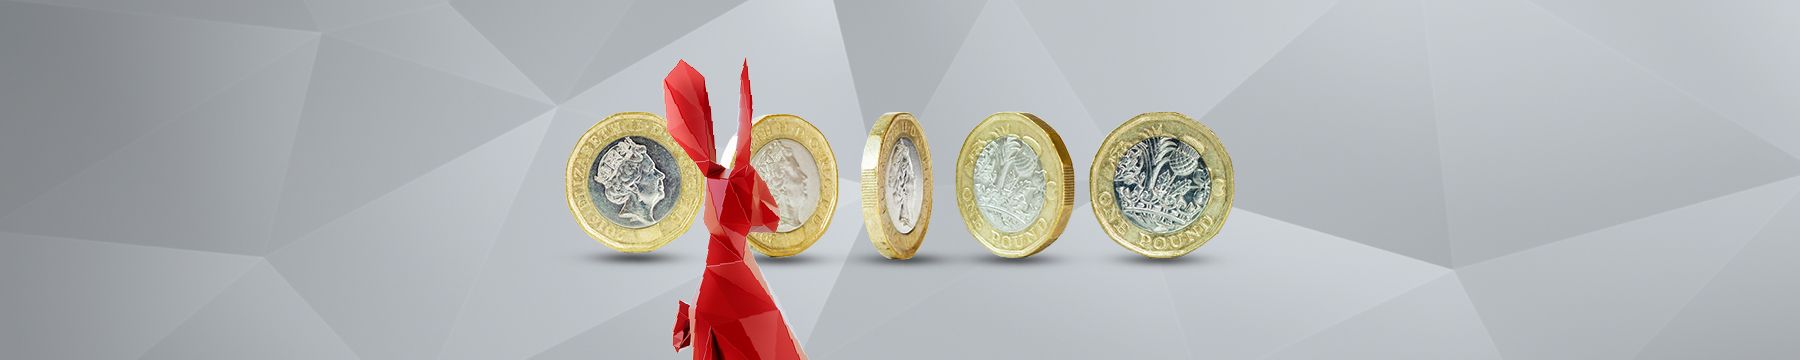 A red Hare observing British pounds 